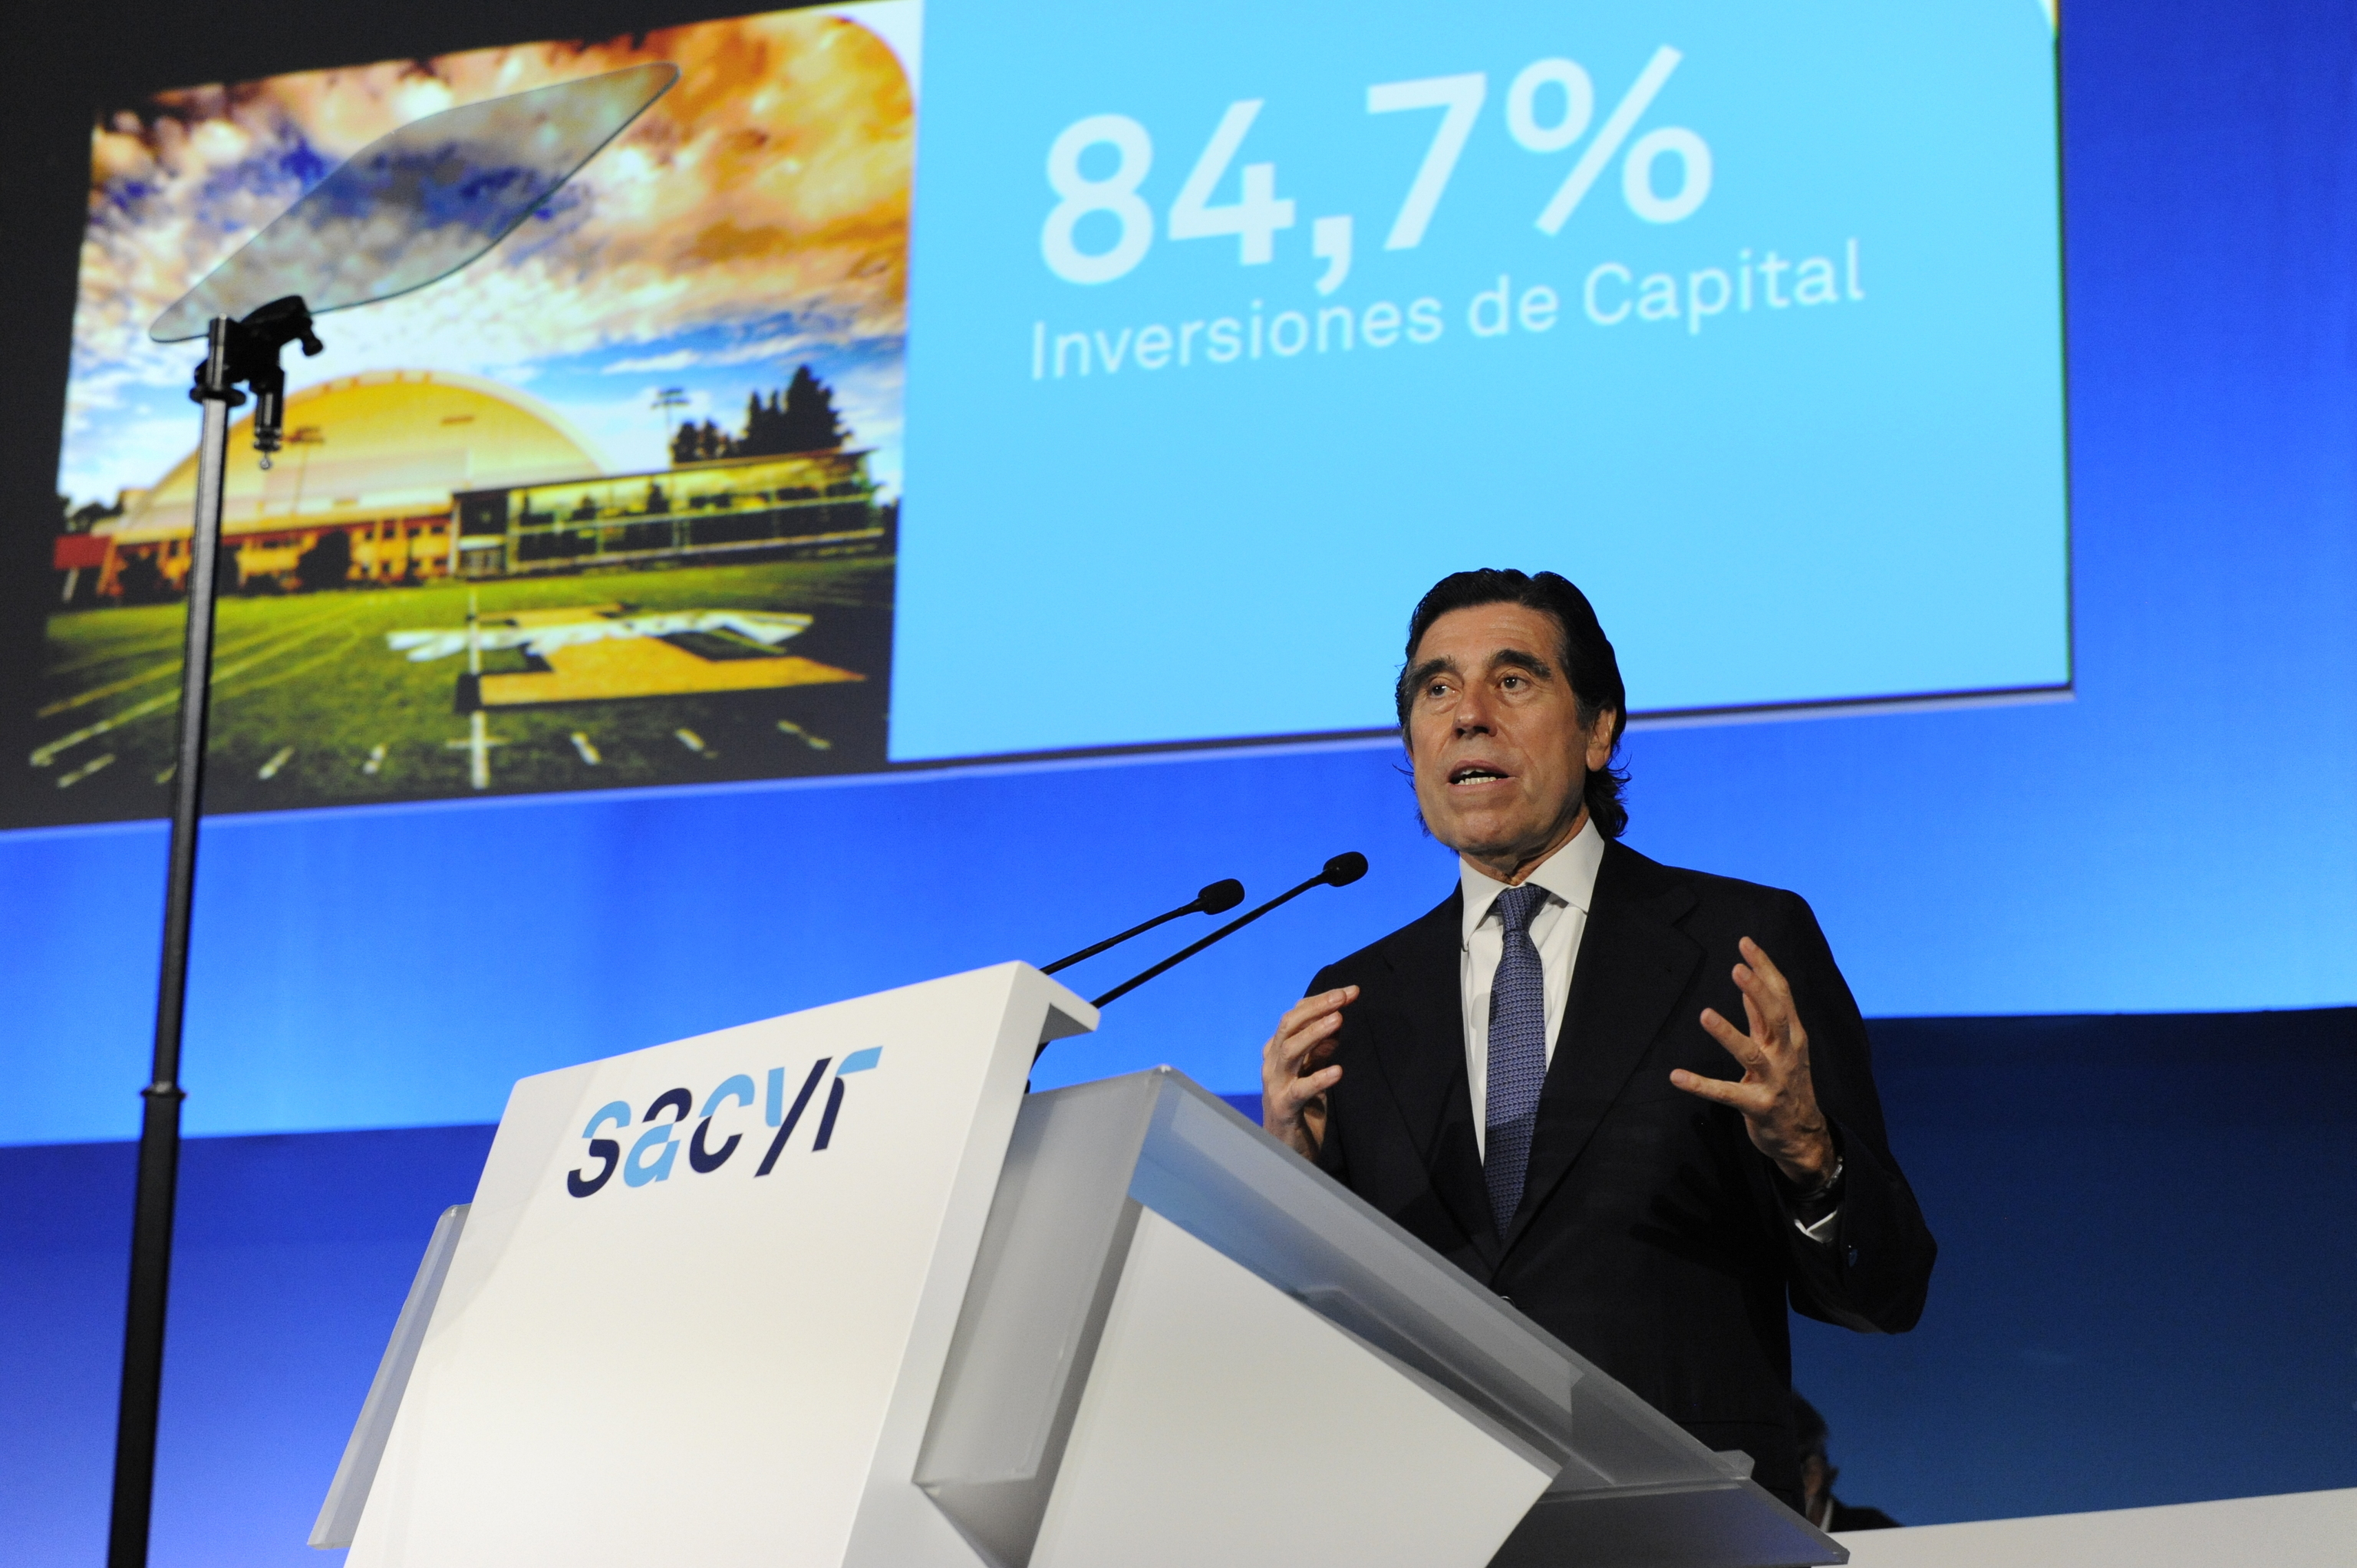 Manuel Manrique, President and CEO of Sasir.